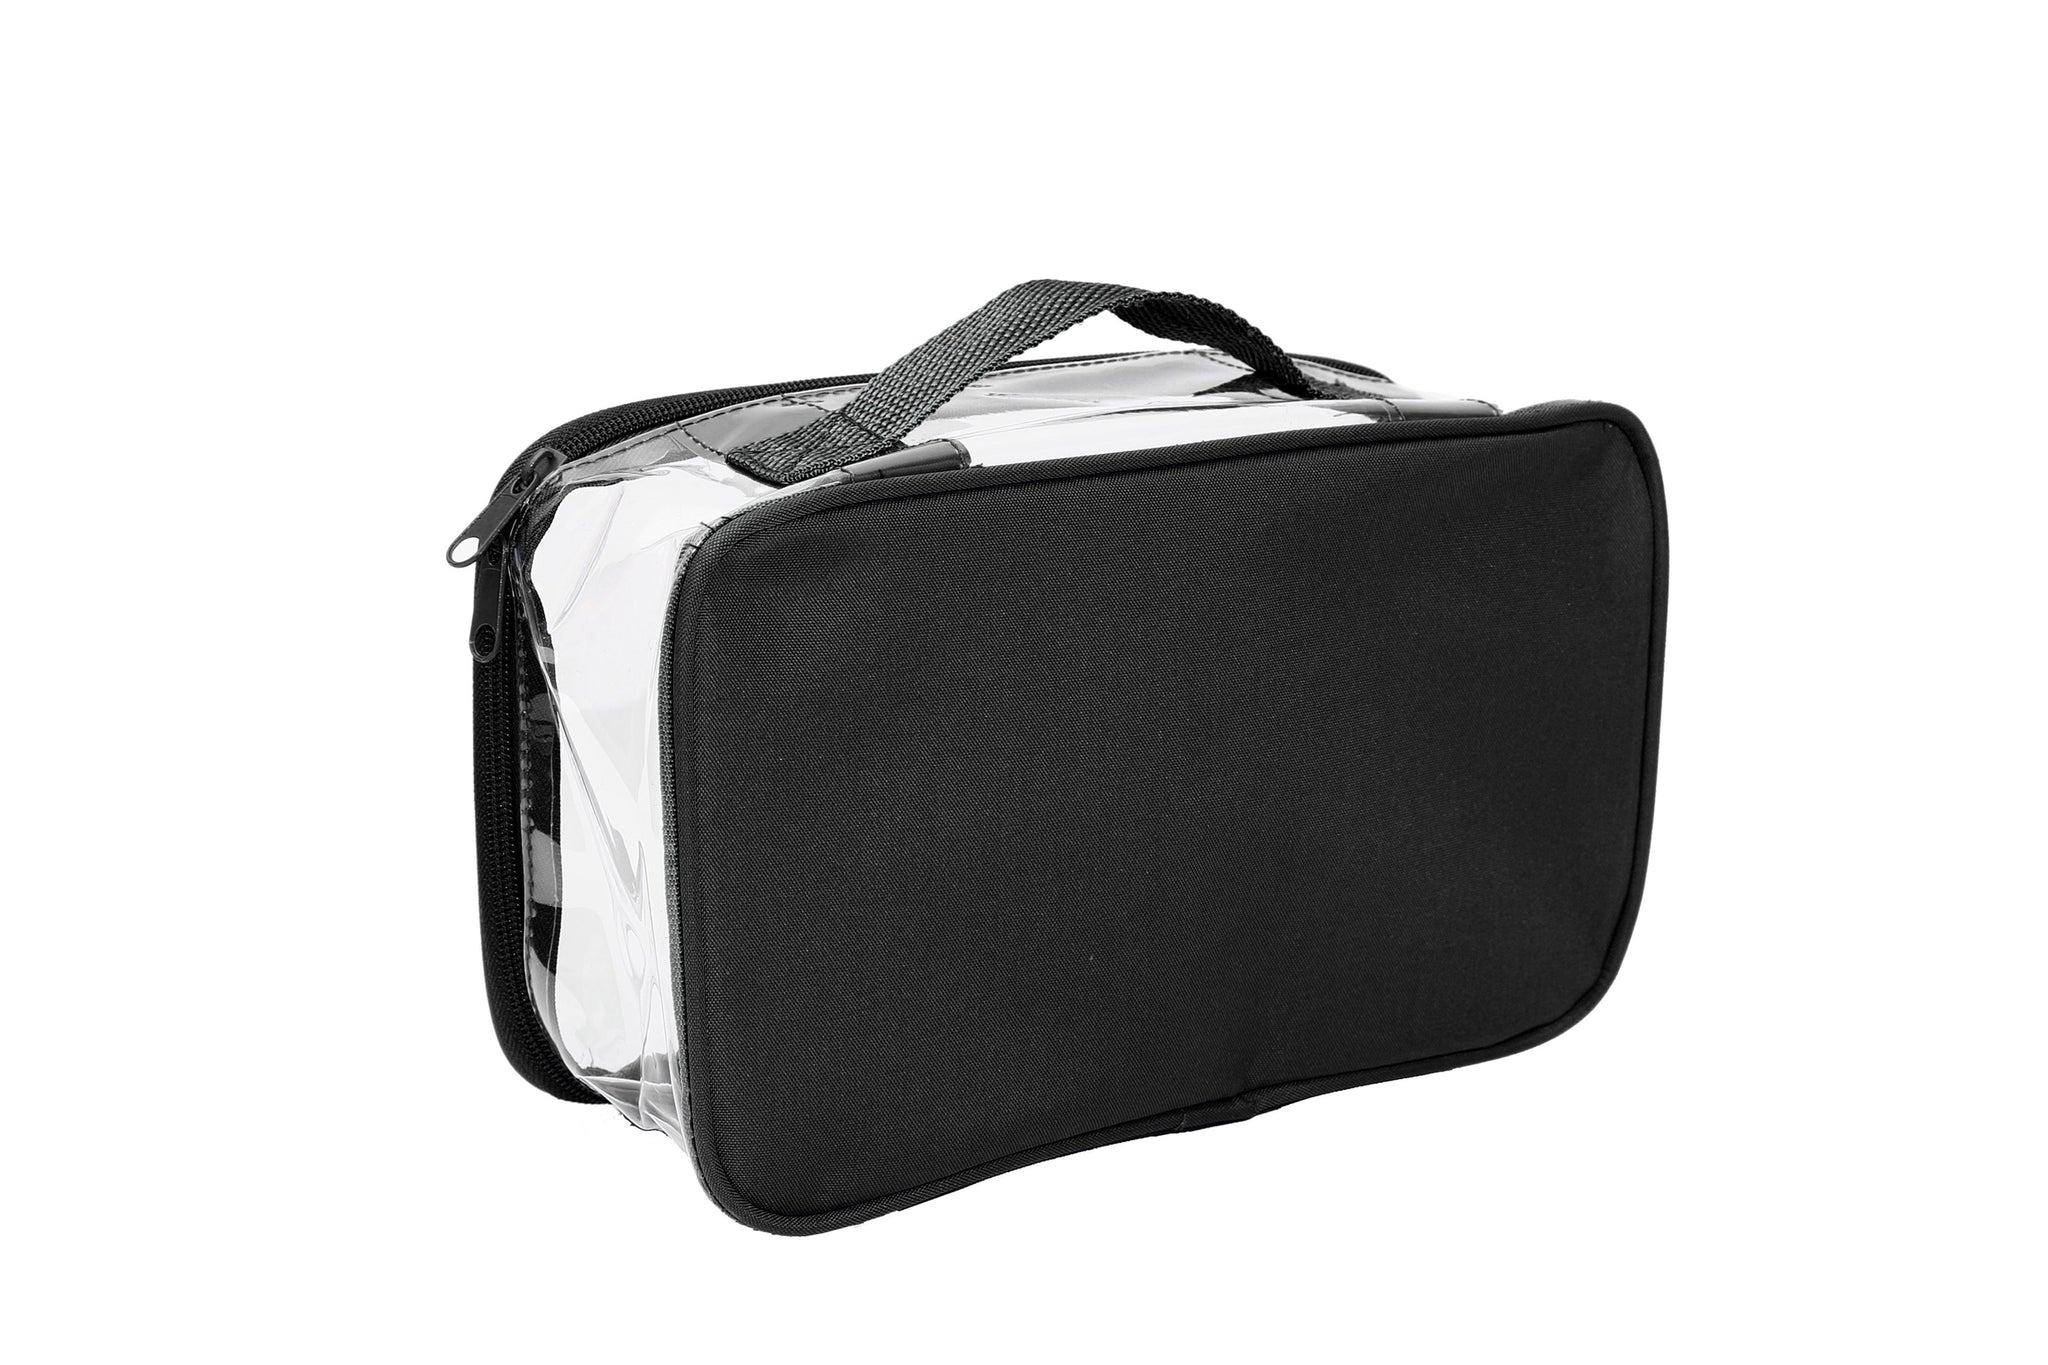 Small Packing Cube for Travel - Clear Suitcase Organizer Pouch with ...